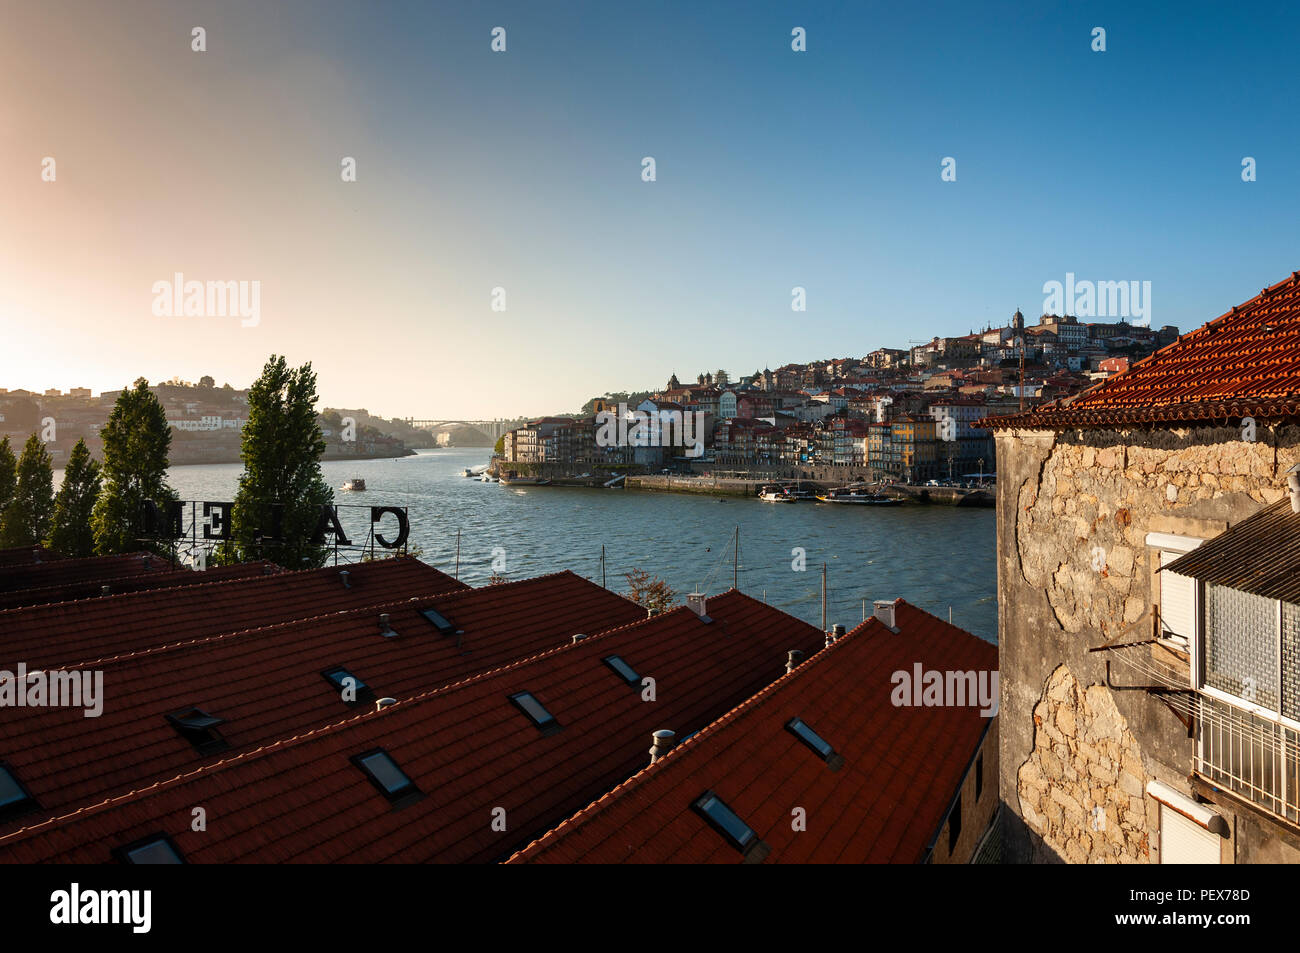 Porto, Portugal - October 4, 2010: View of the Ribeira Neighborhood and the Douro River with Rabelo Boats, in the city of Porto, Portugal Stock Photo